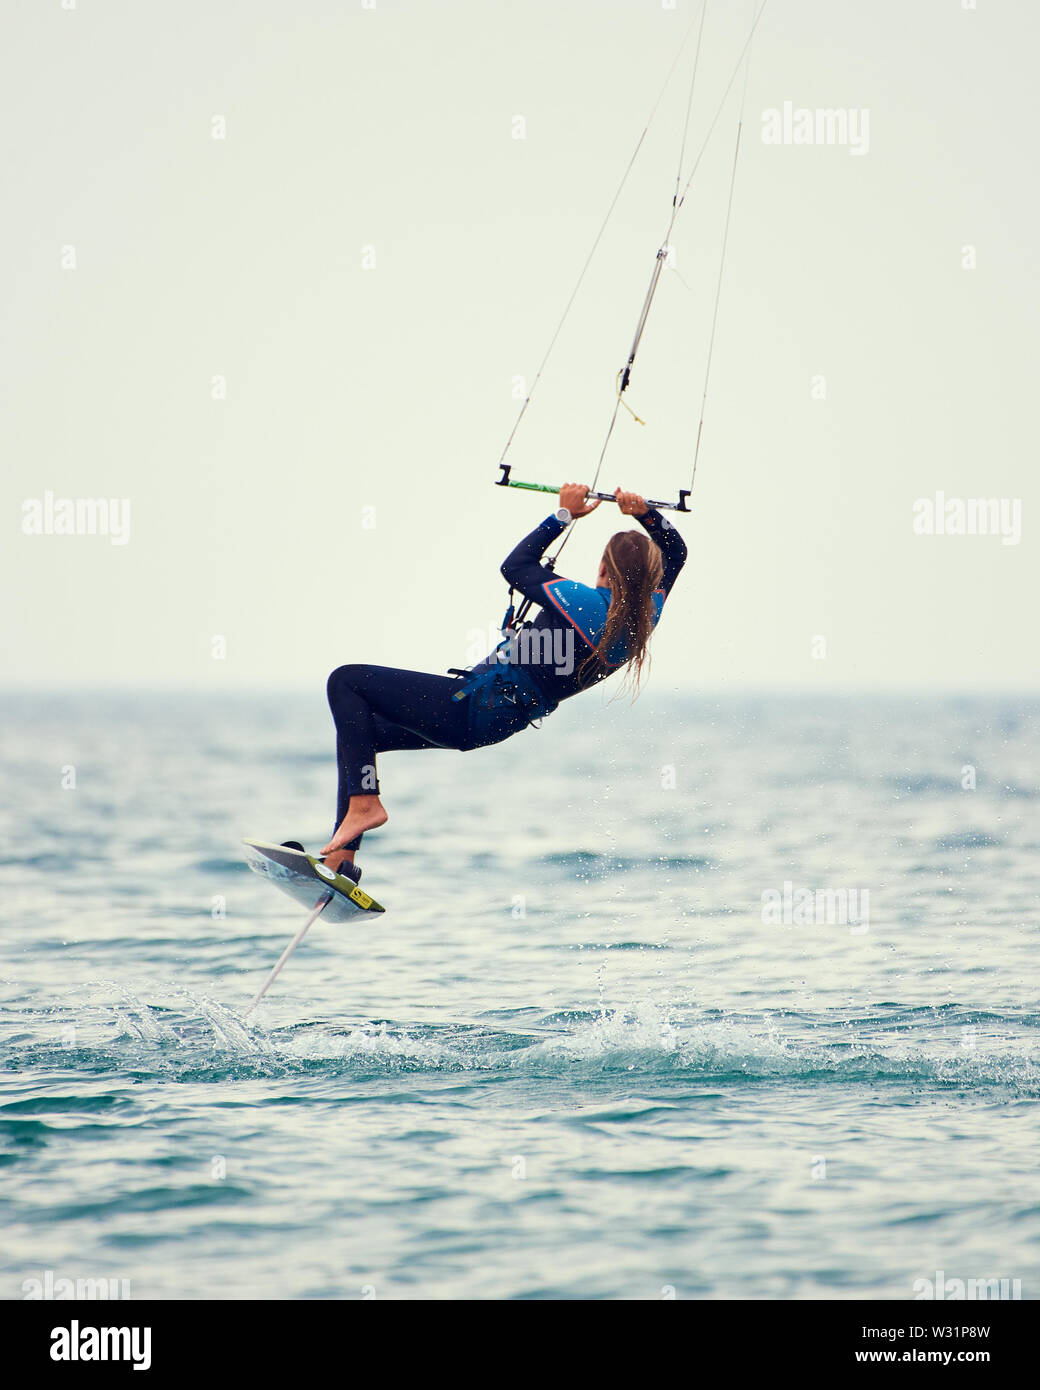 Armada Kiteboarding festival. Woman lifted from the water in aerial turn. One foot off of the board. Stock Photo